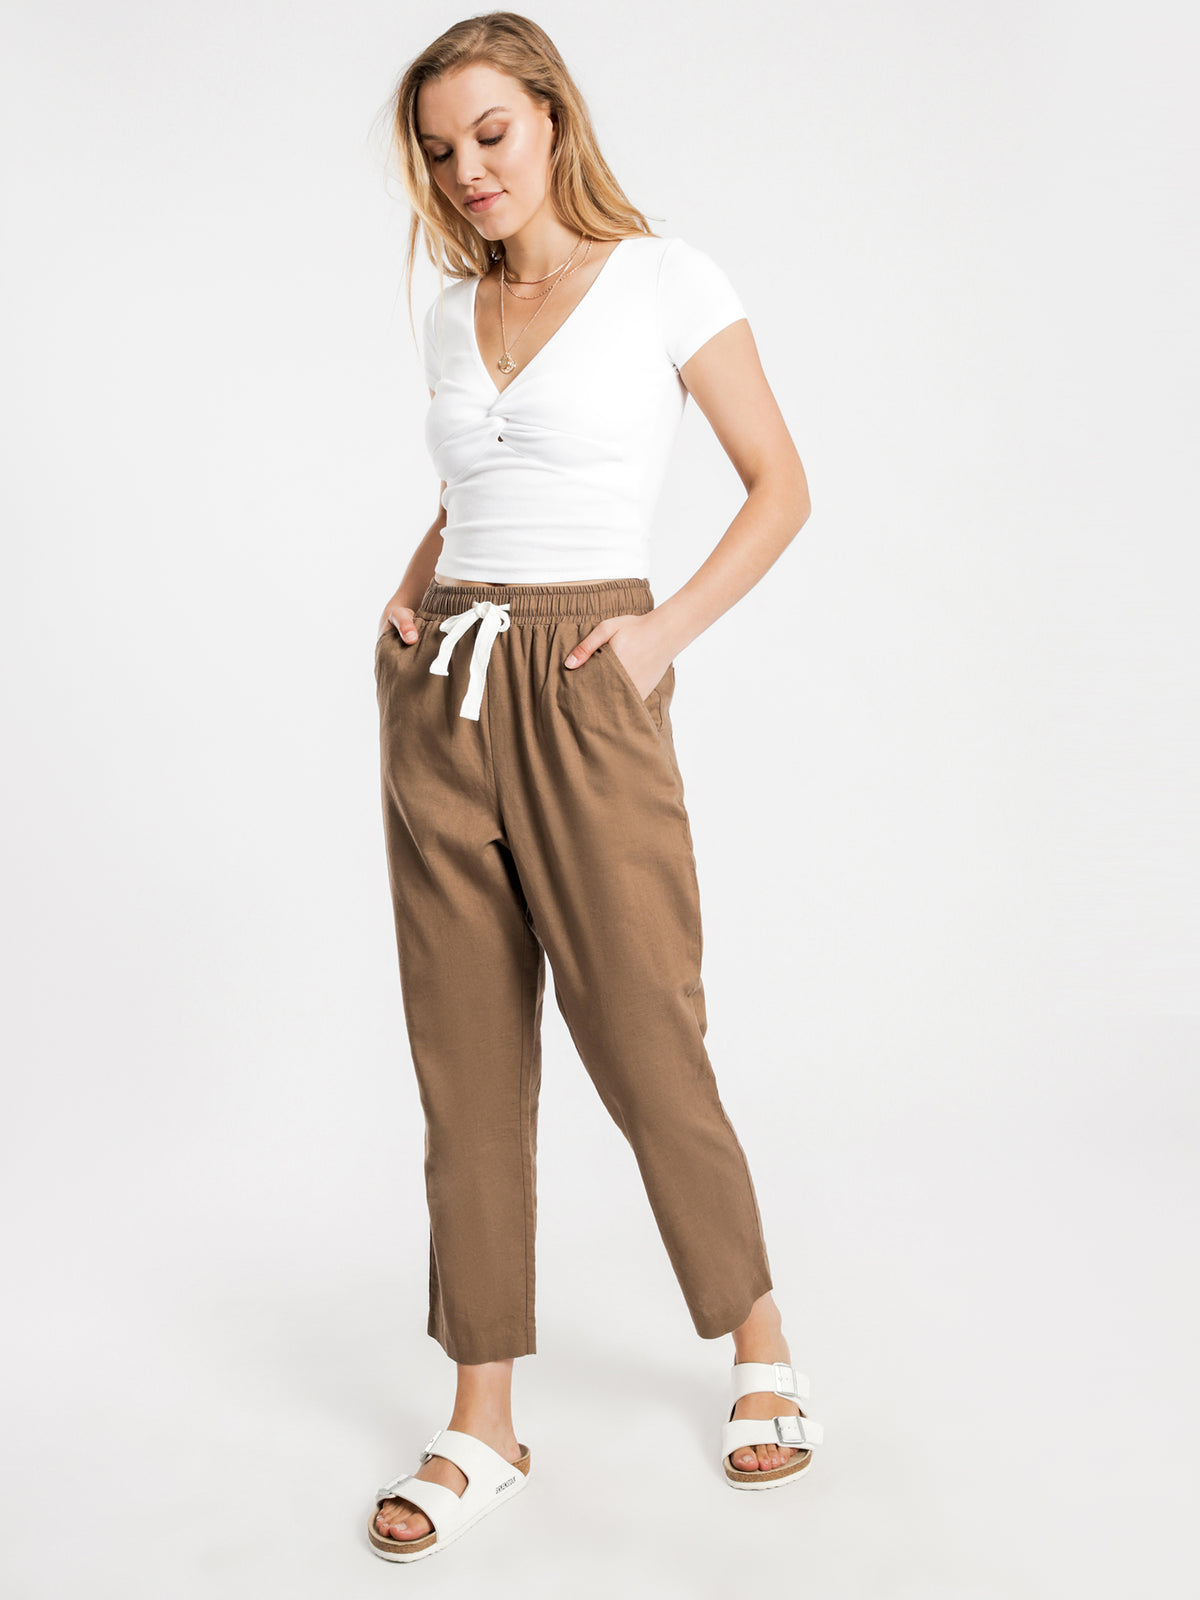 Classic Pants in Chocolate